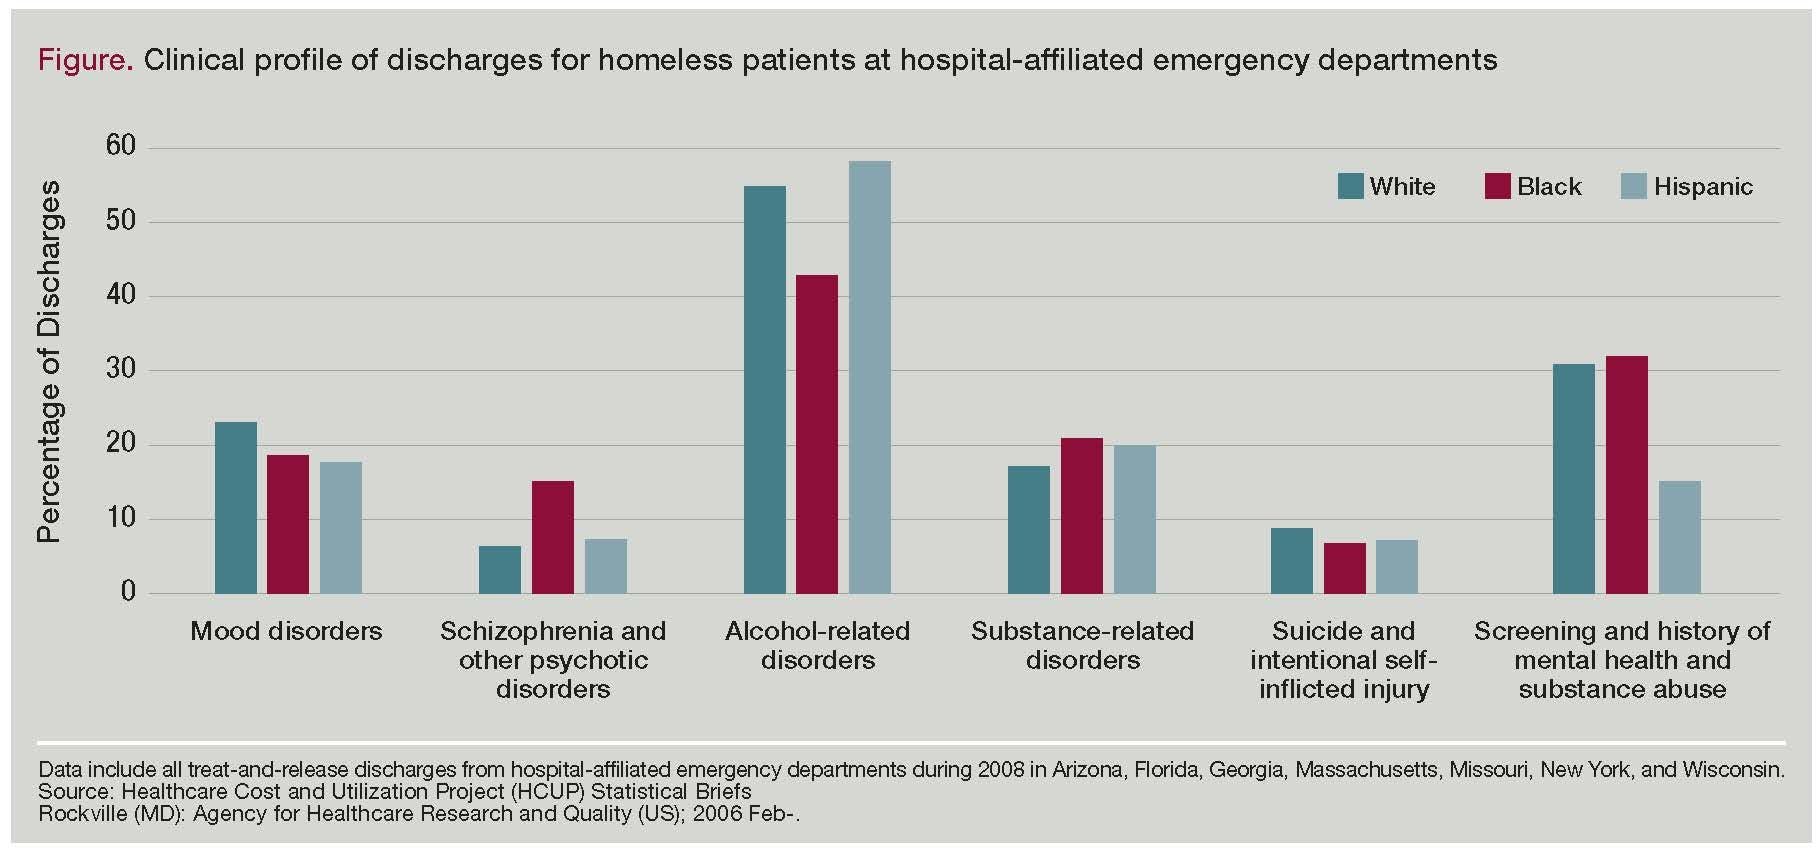 Figure. Clinical profile of discharges for homeless patients at hospital-affiliated emergency departments